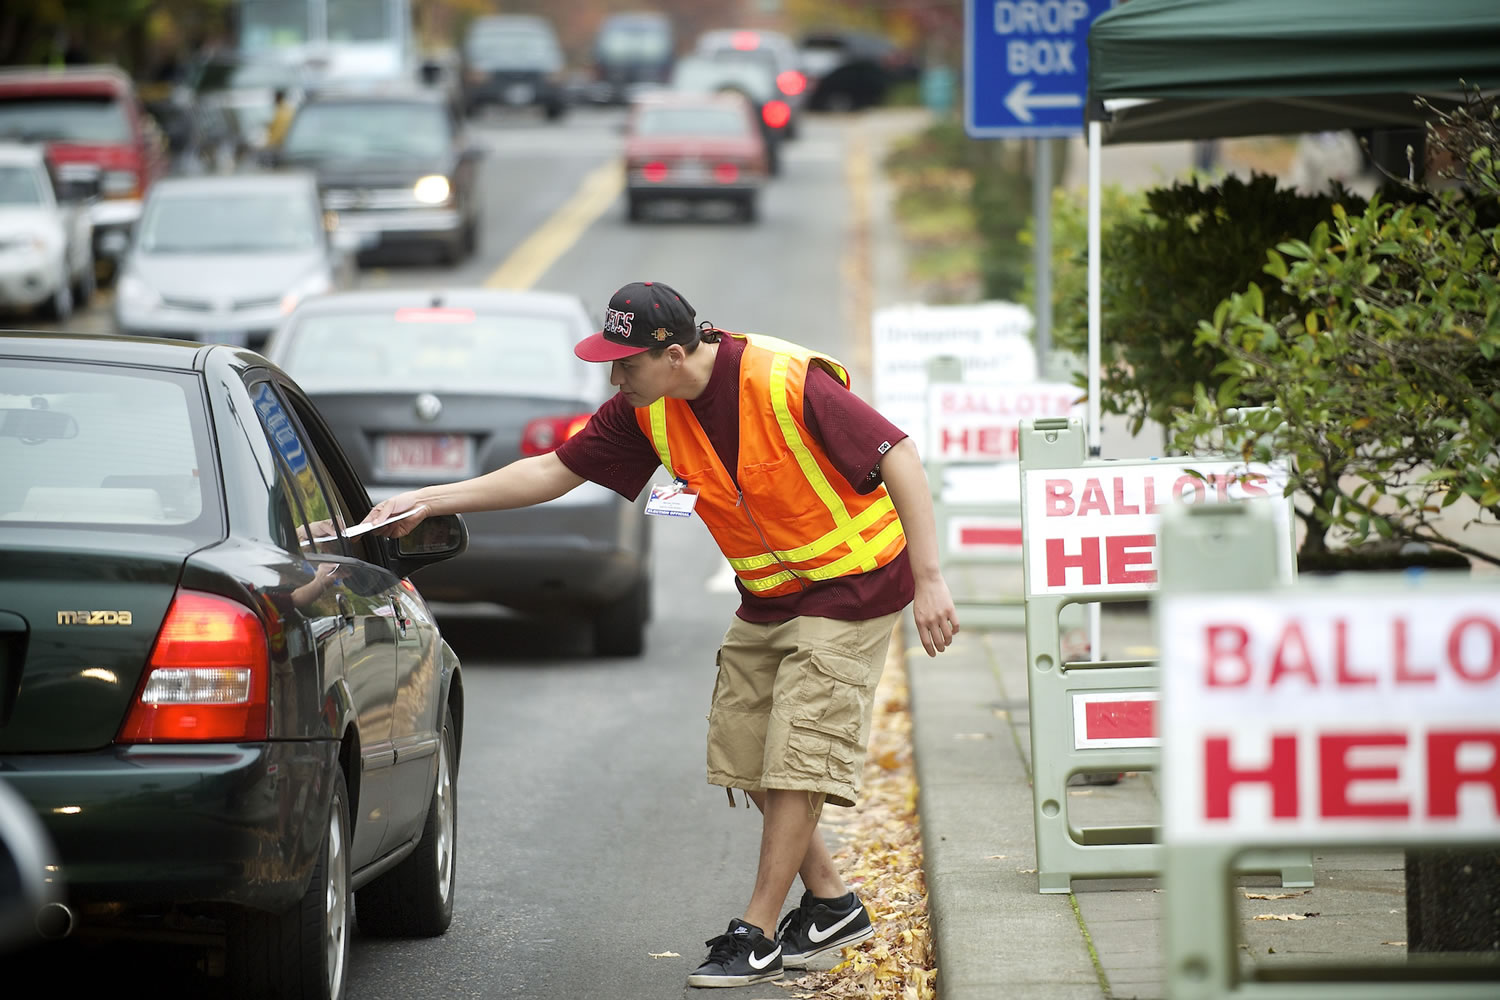 Clark County elections official Miguel Rivera takes ballots from motorists outside the Clark County Elections office Tuesday.